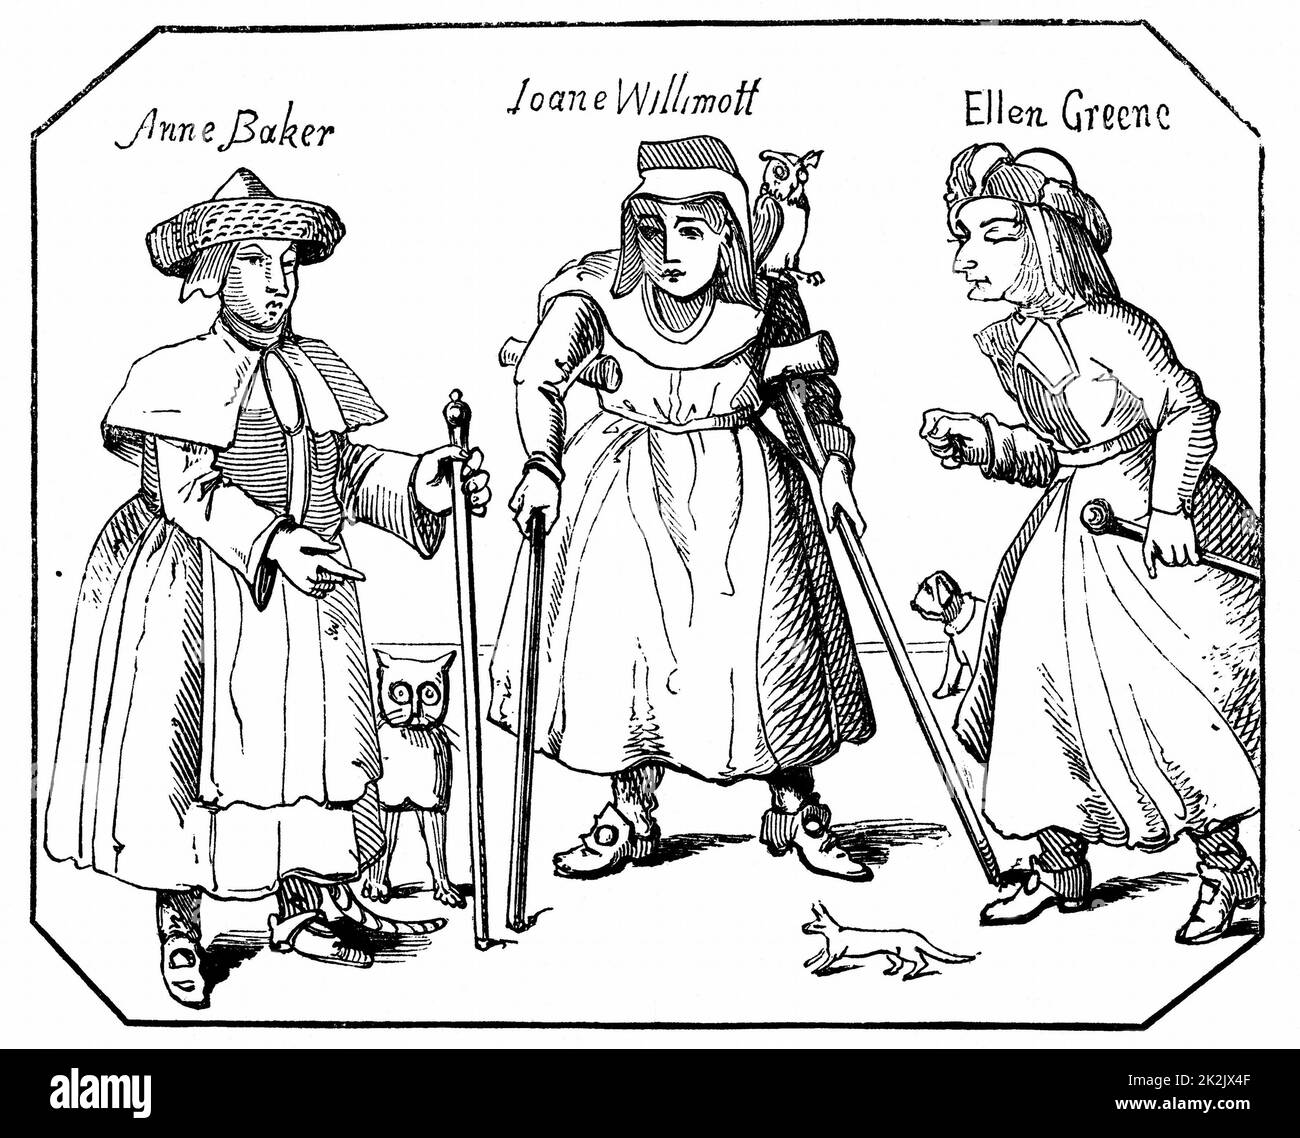 Anne Baker, Joanne Willimott and Ellen Greene, Leicestershire women with their pets and familiars. Associates of the Witches of Belvoir. Condemned to be burnt 1619: England. Engraving Stock Photo